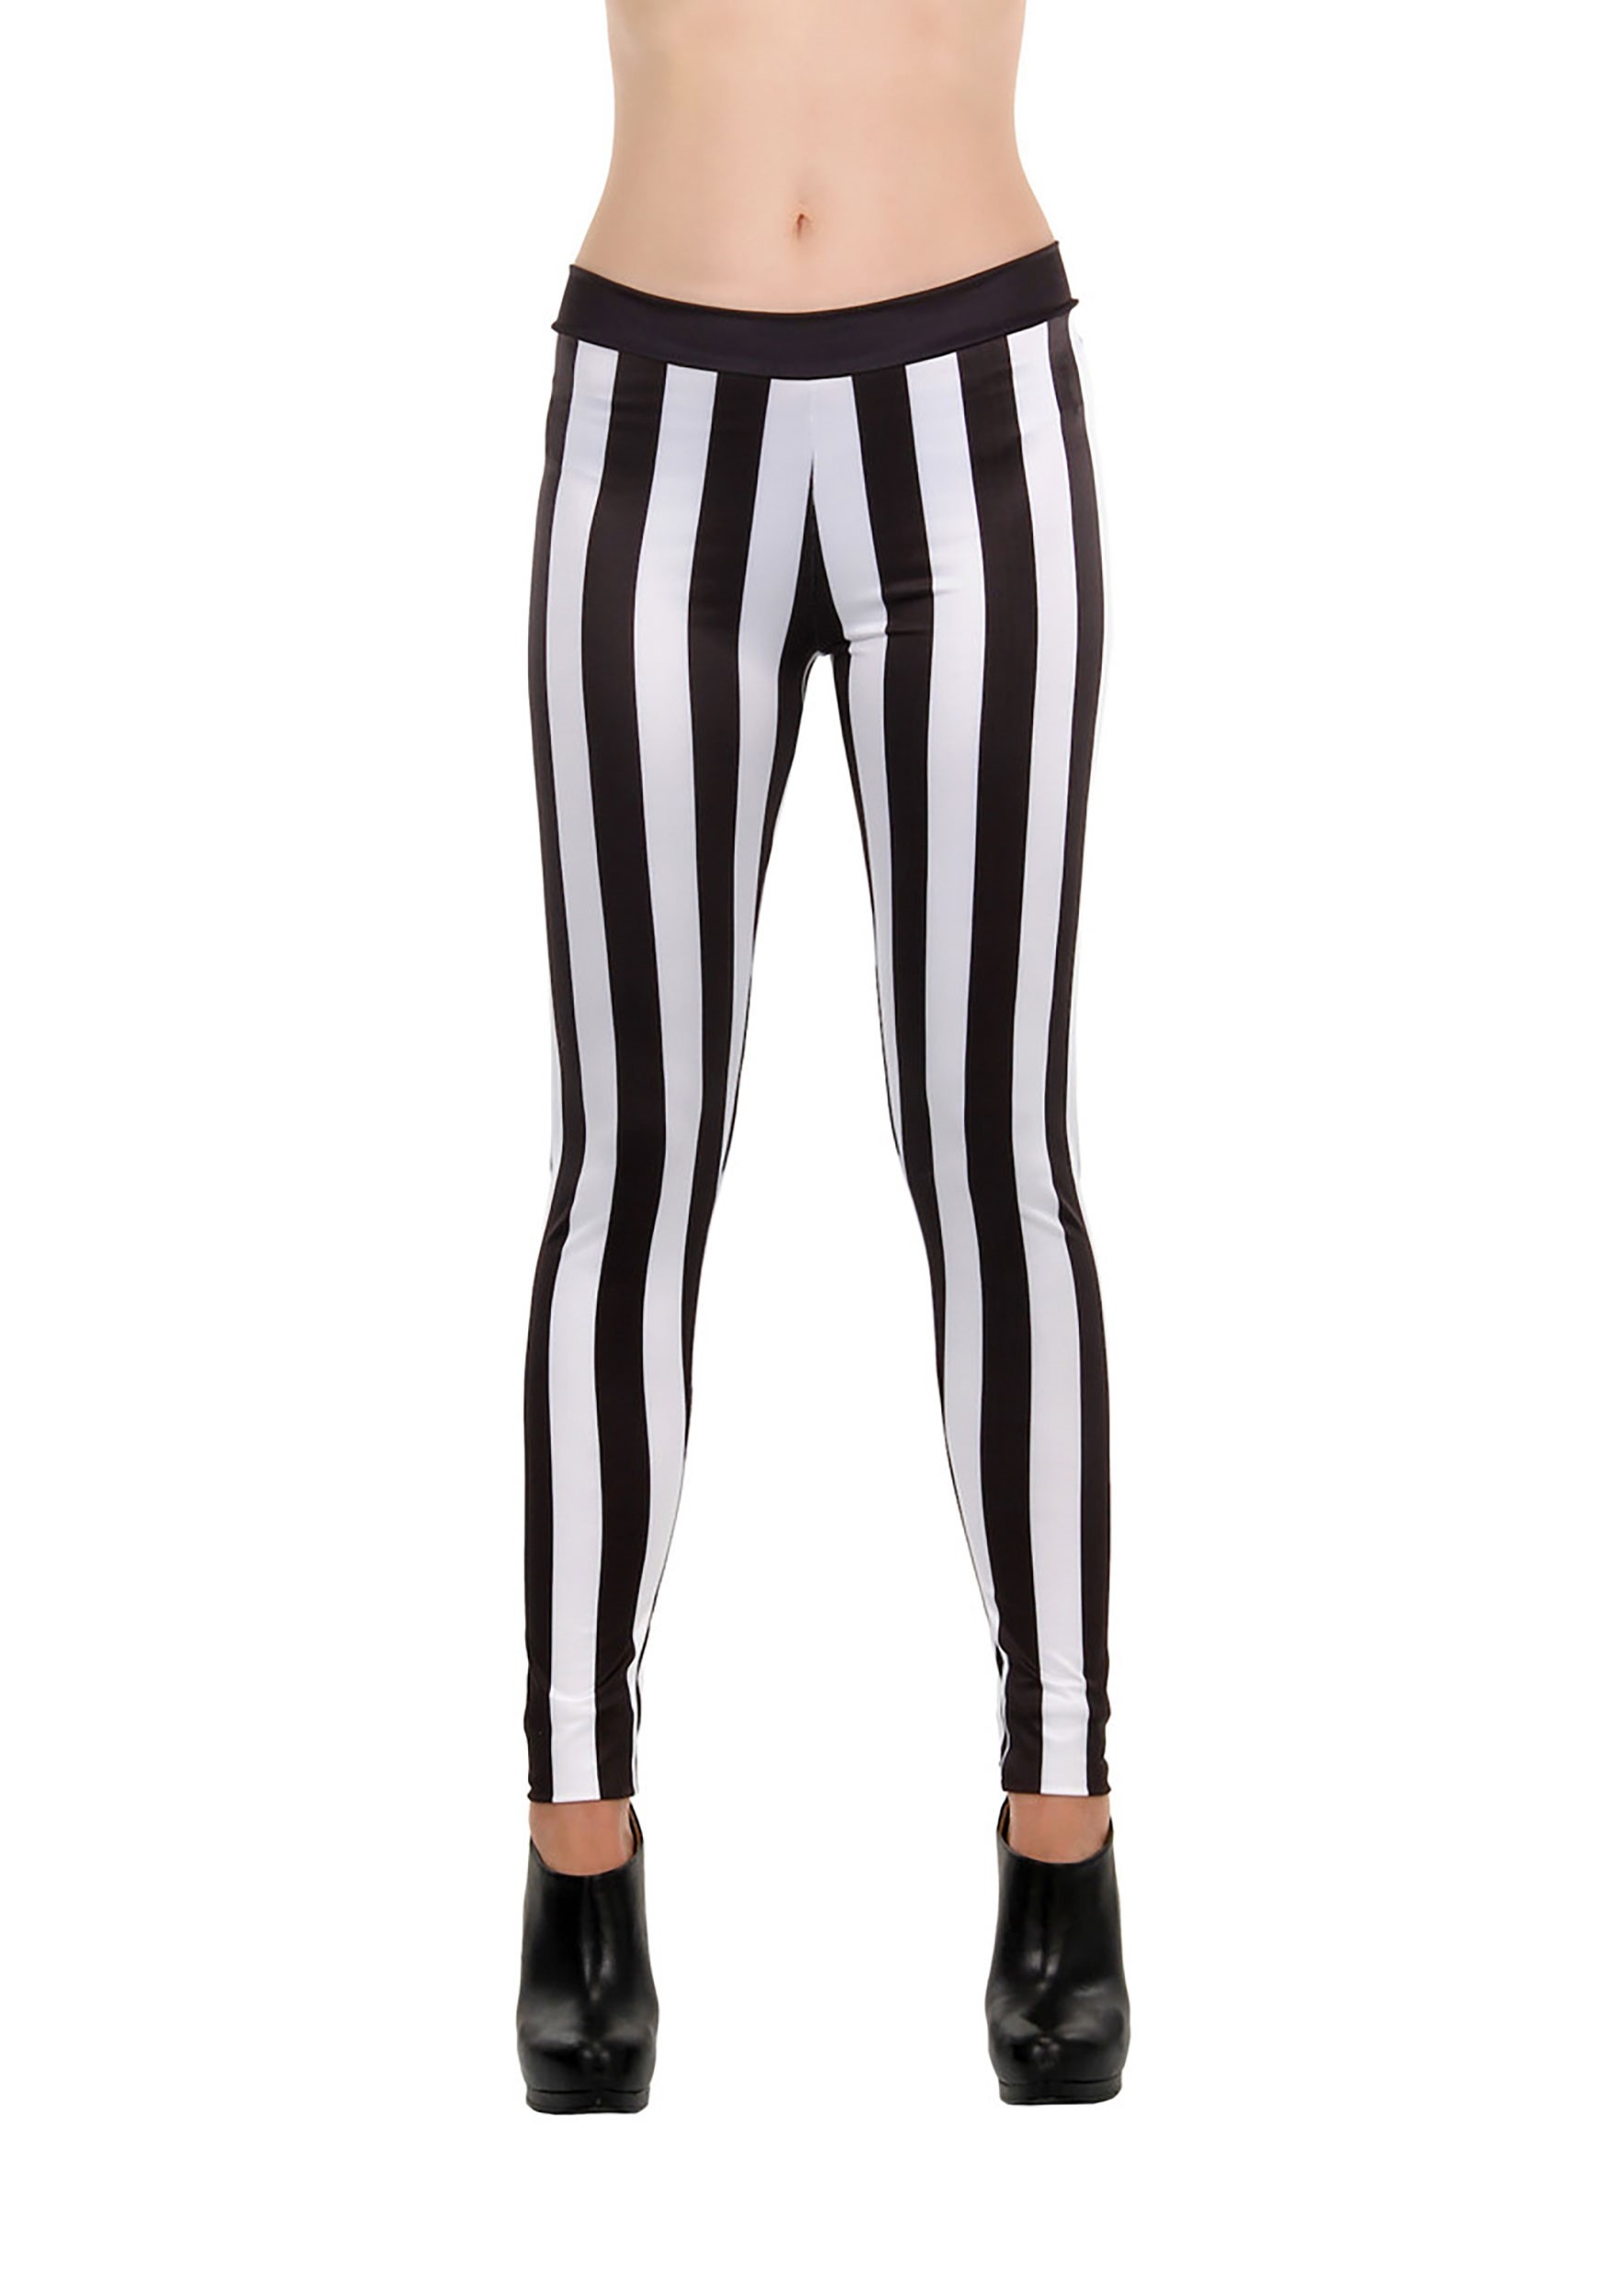 Plus Size Leggings Red and White Vertical Stripes Cirque